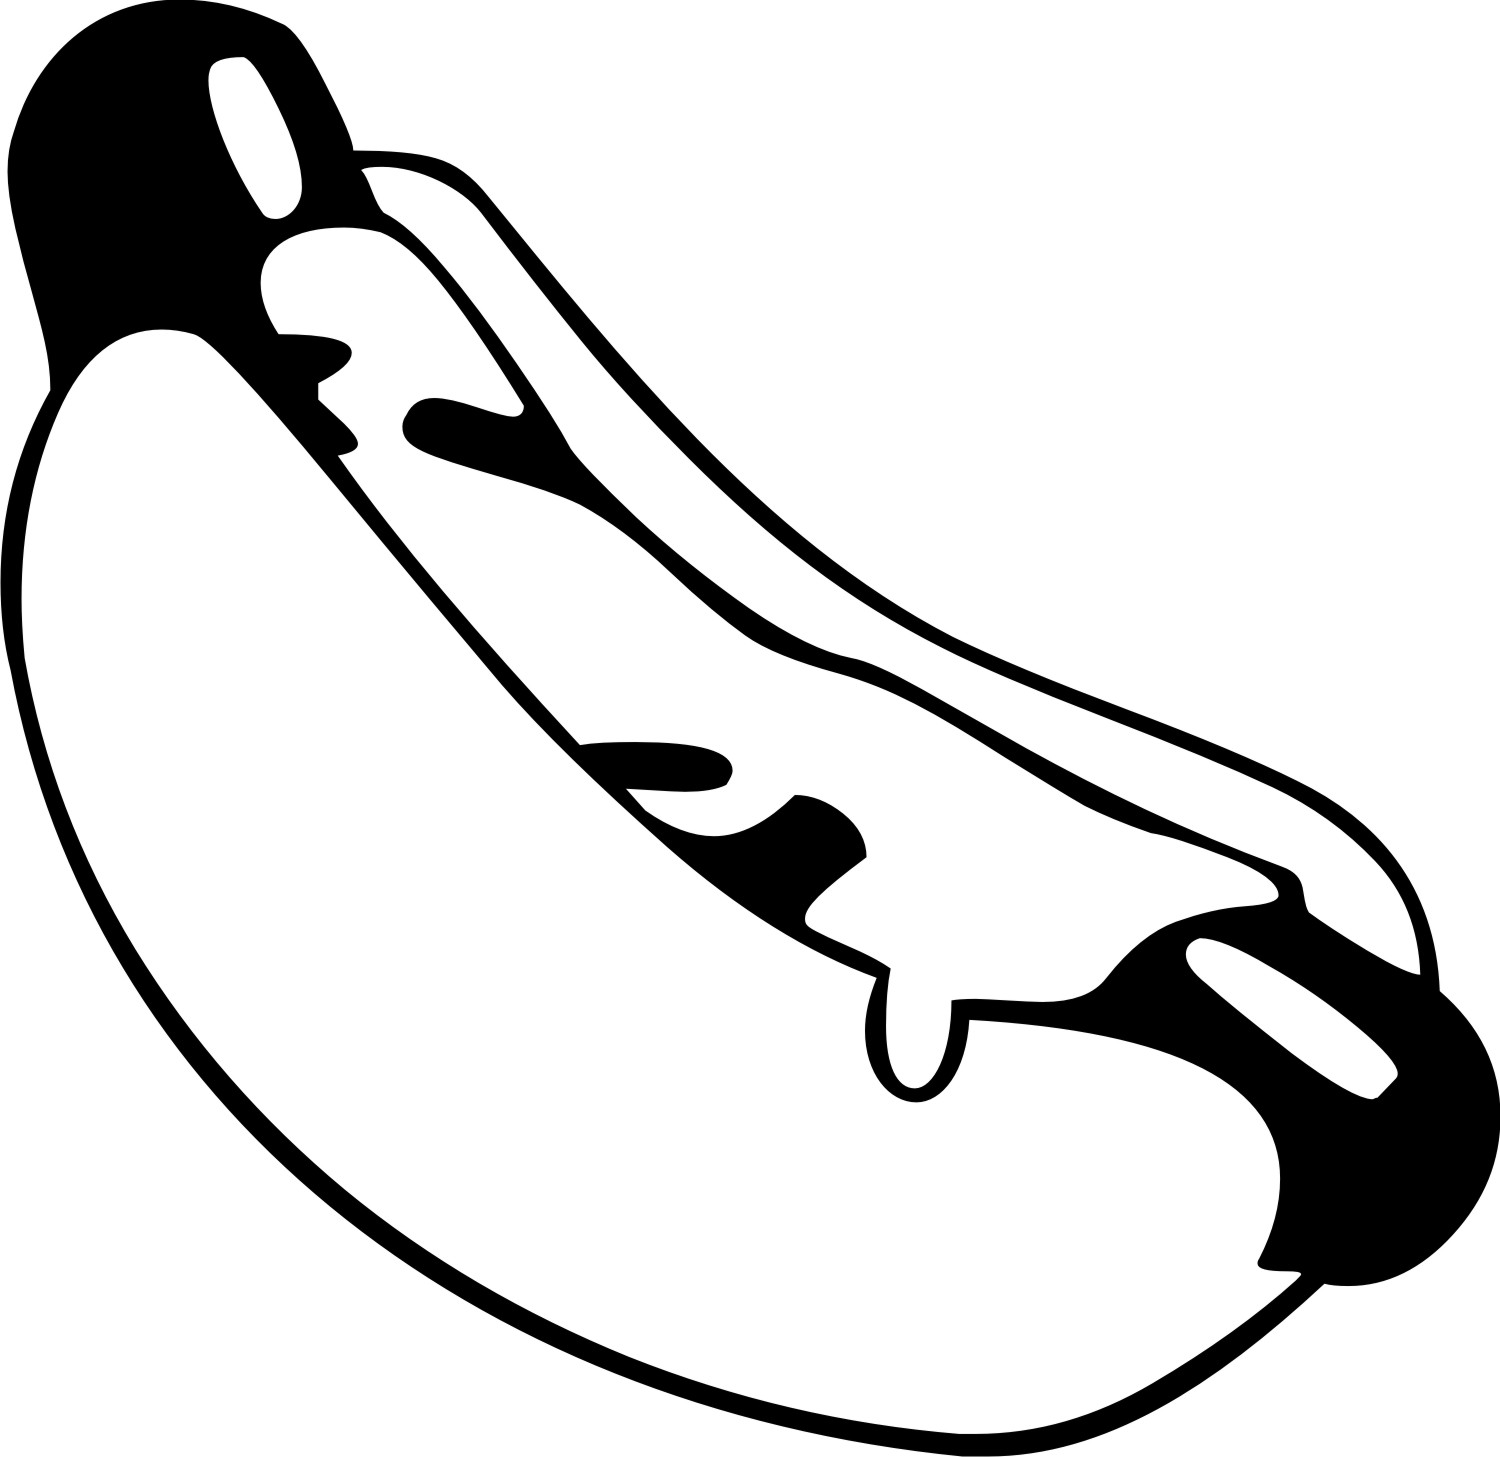 Hot Dog Clipart - Cliparts.co